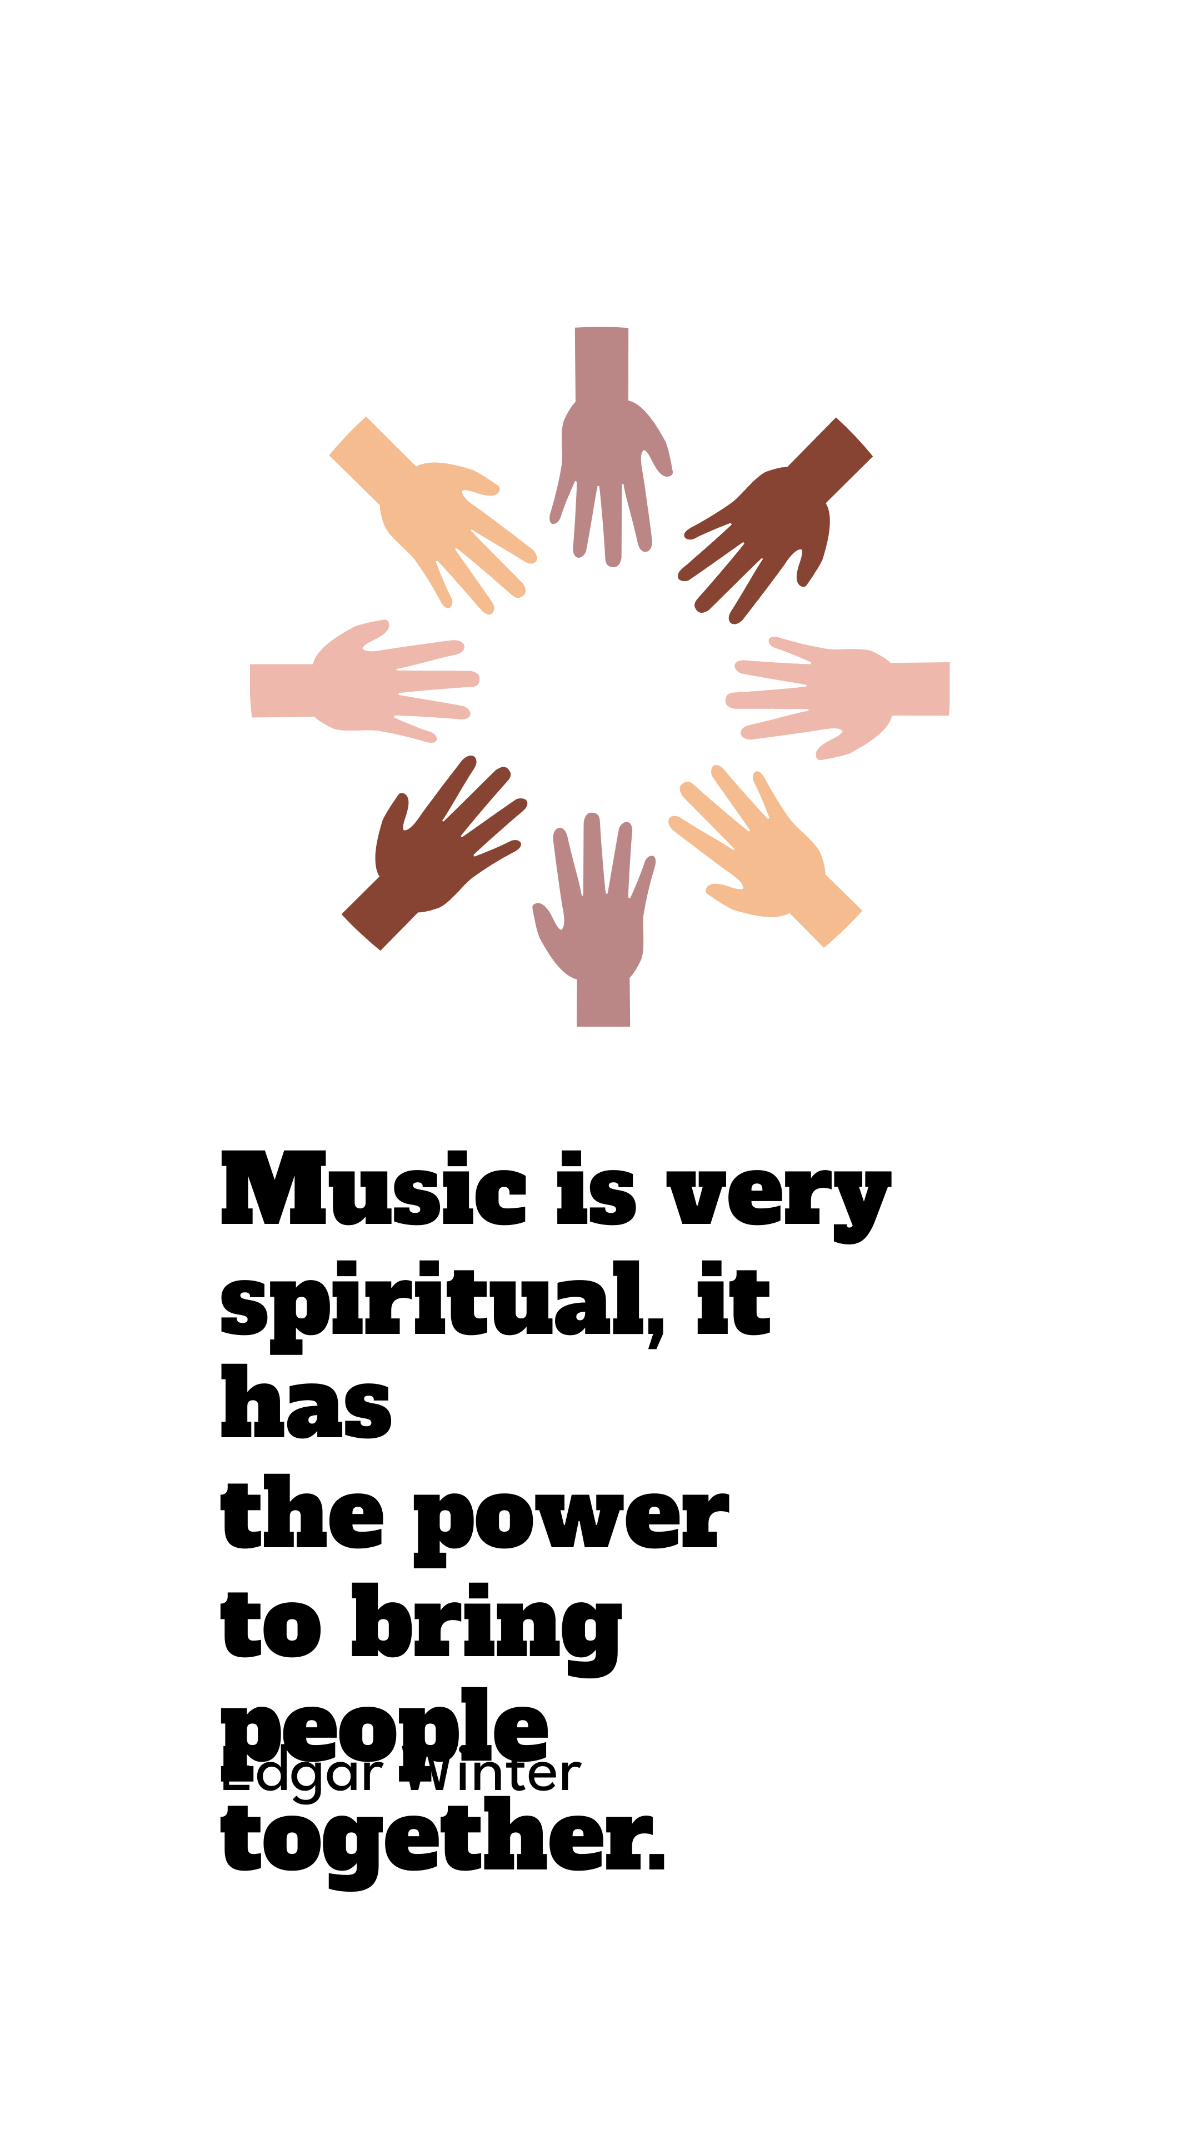 Edgar Winter - Music is very spiritual, it has the power to bring people together.